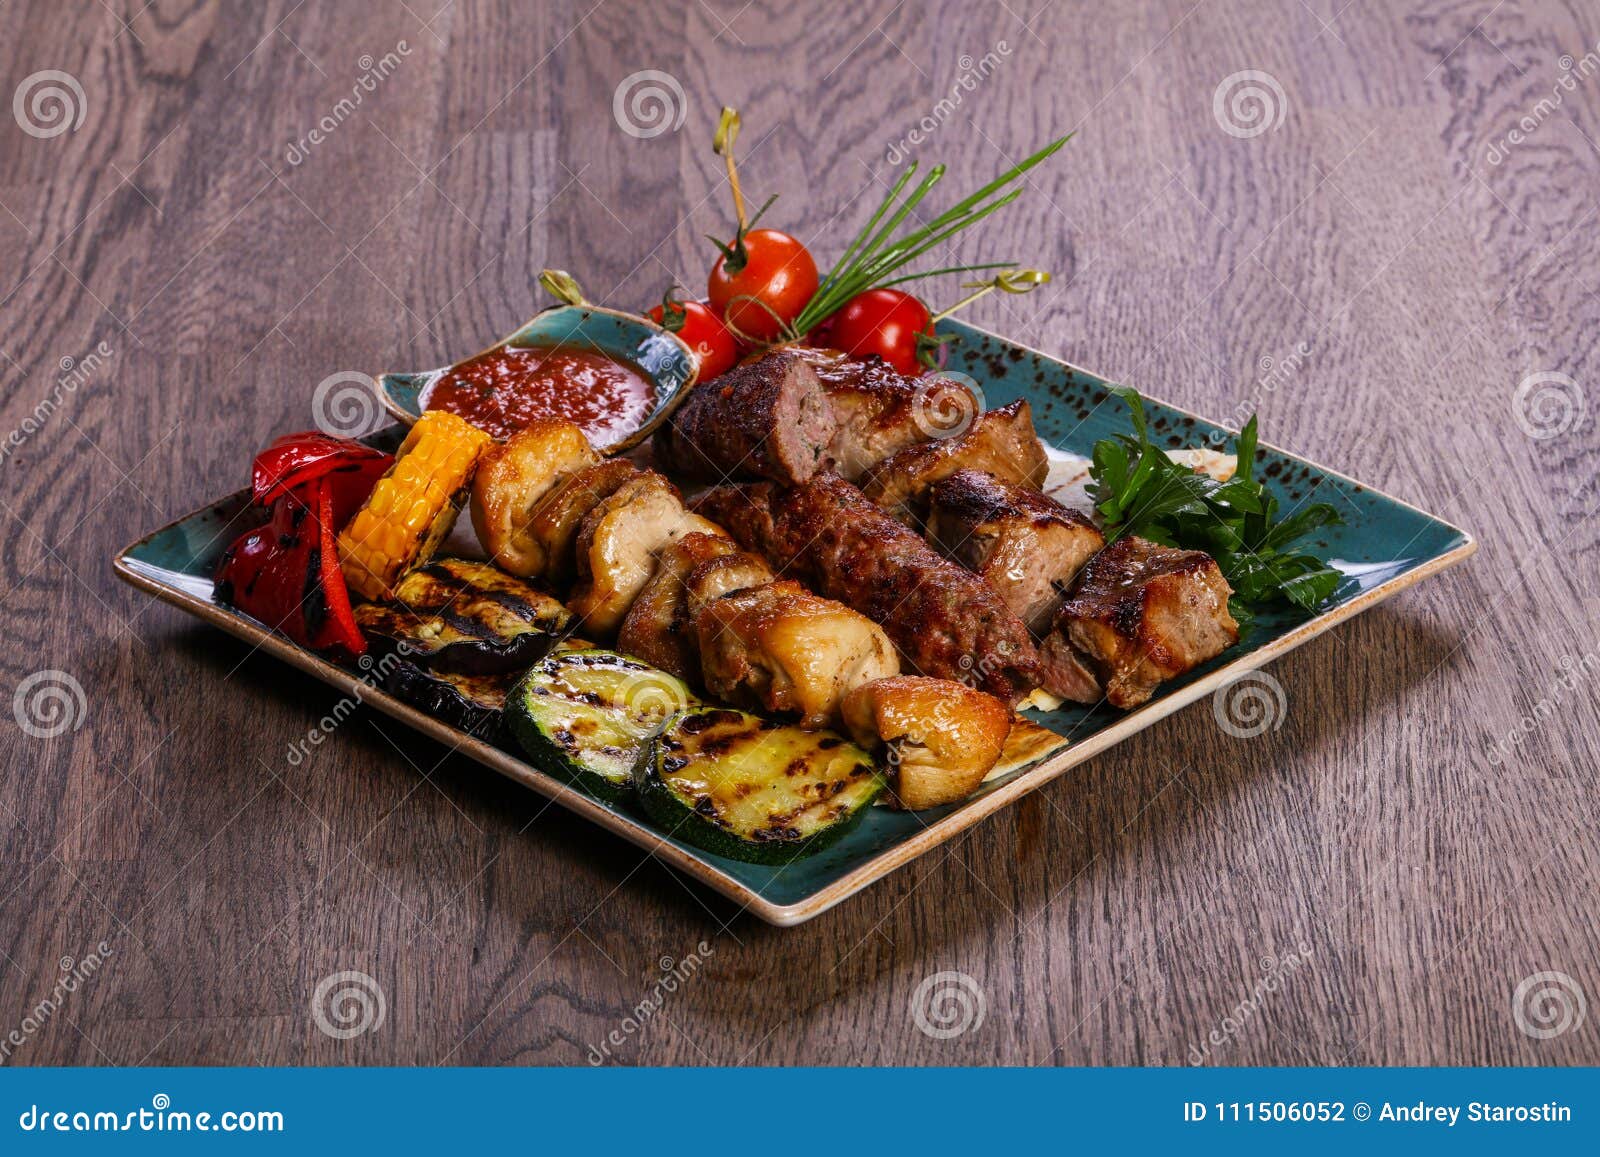 Grilled plate mix stock photo. Image of cooked, roasted - 111506052